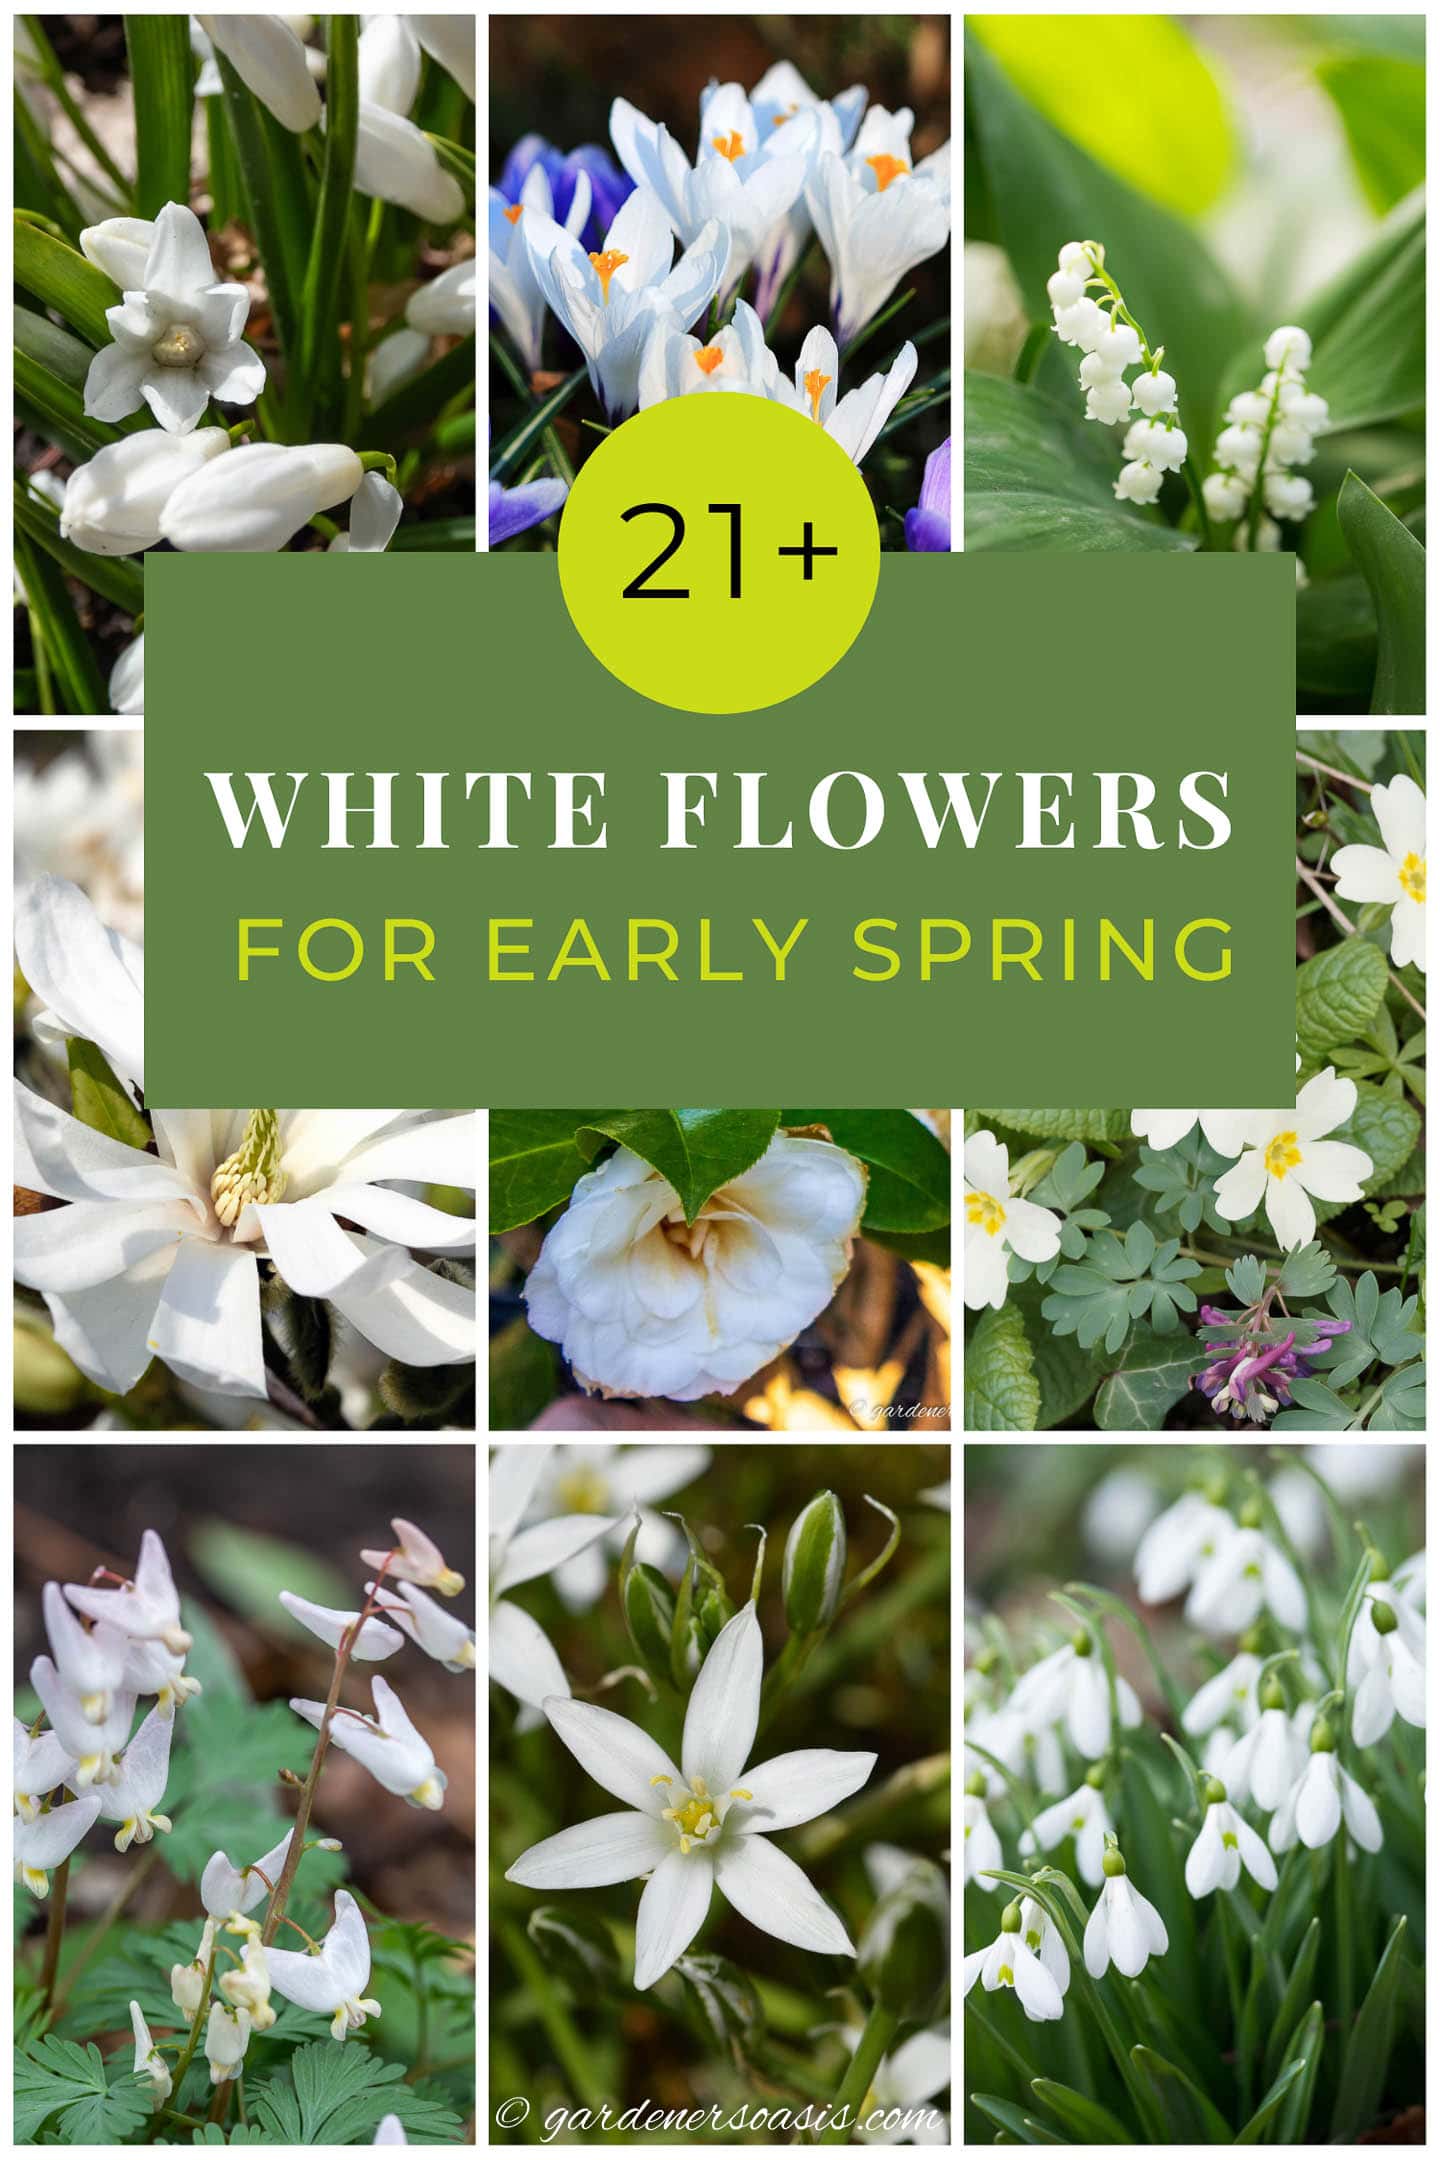 21+ early spring white flowers